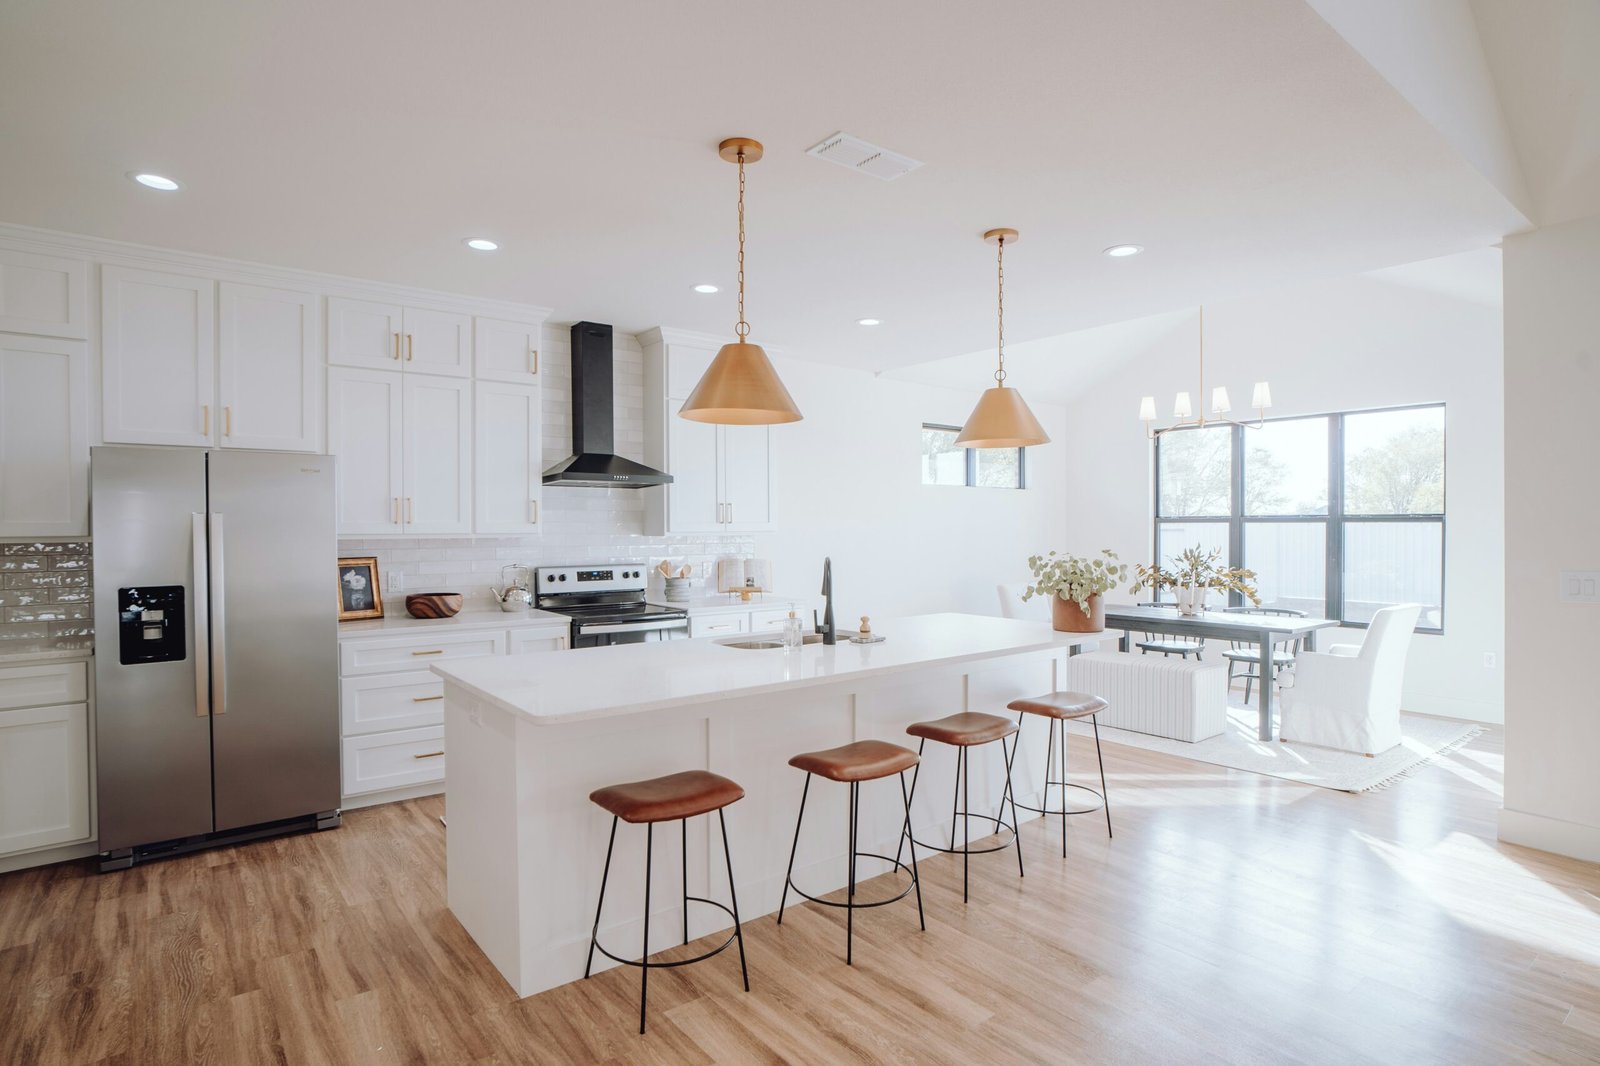 Best material for kitchen island